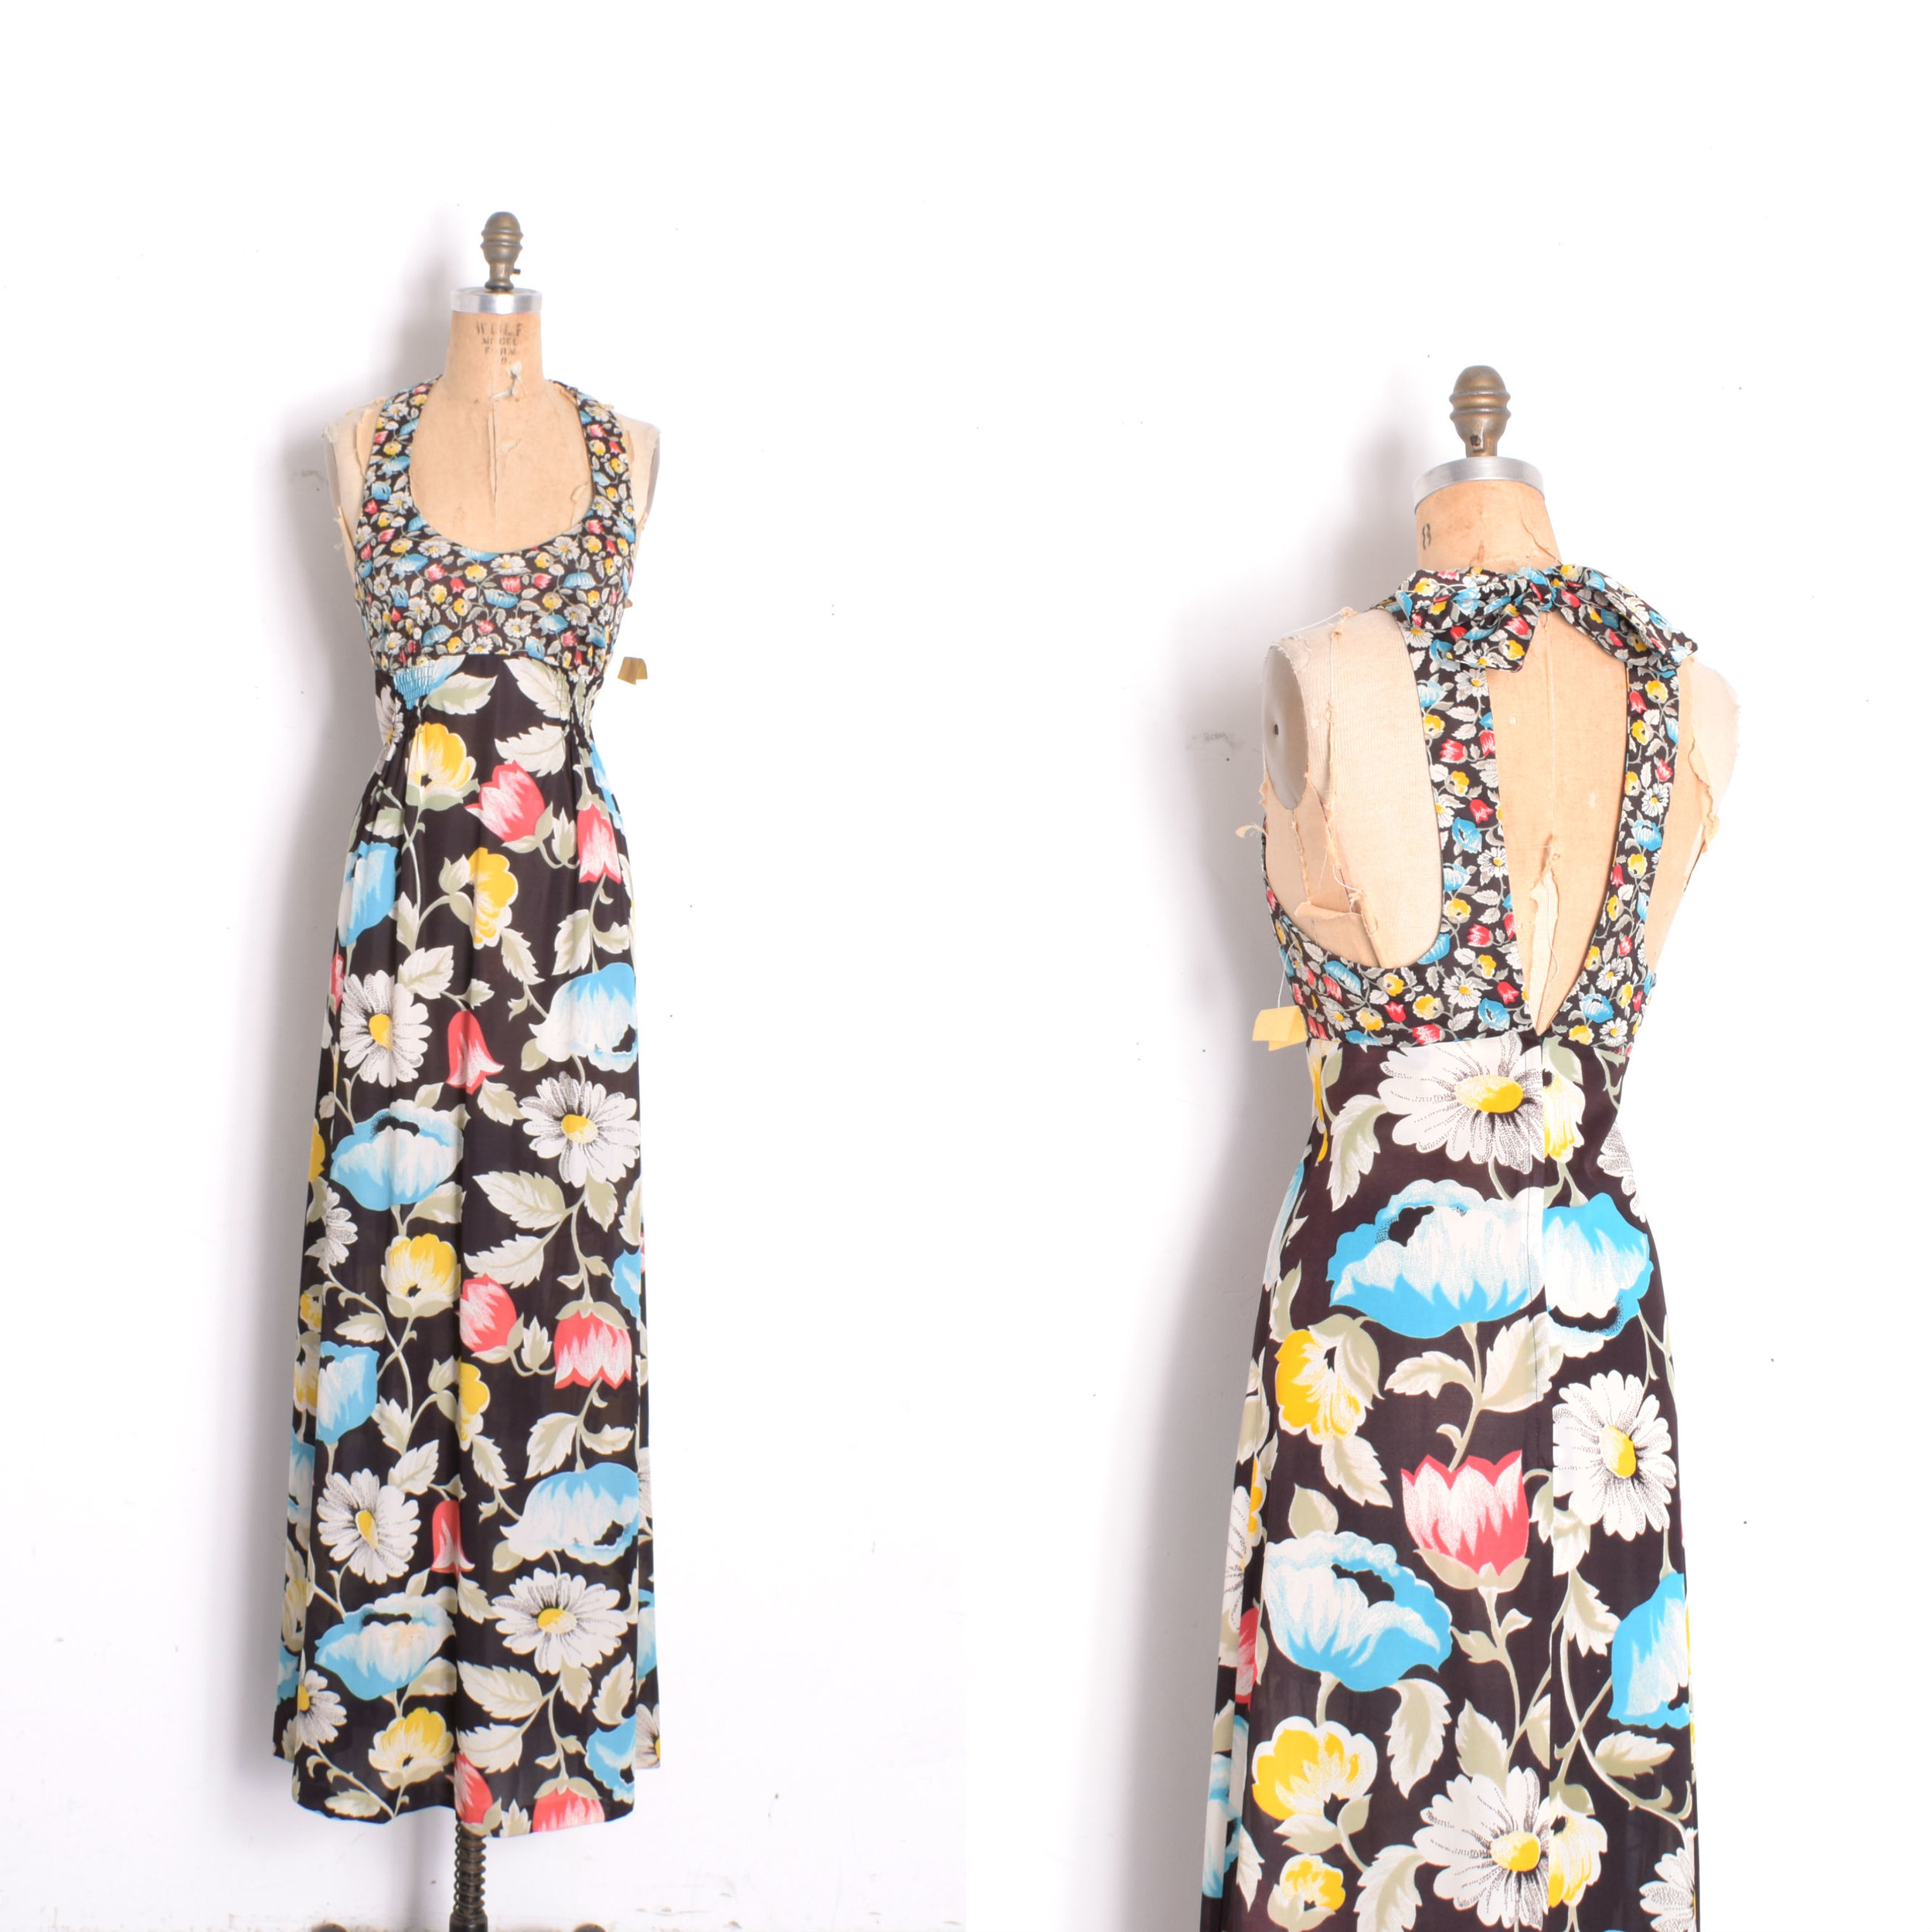 Vintage 1970s 1980s jersey tropical colorful print and triangular open back neckline dress size M